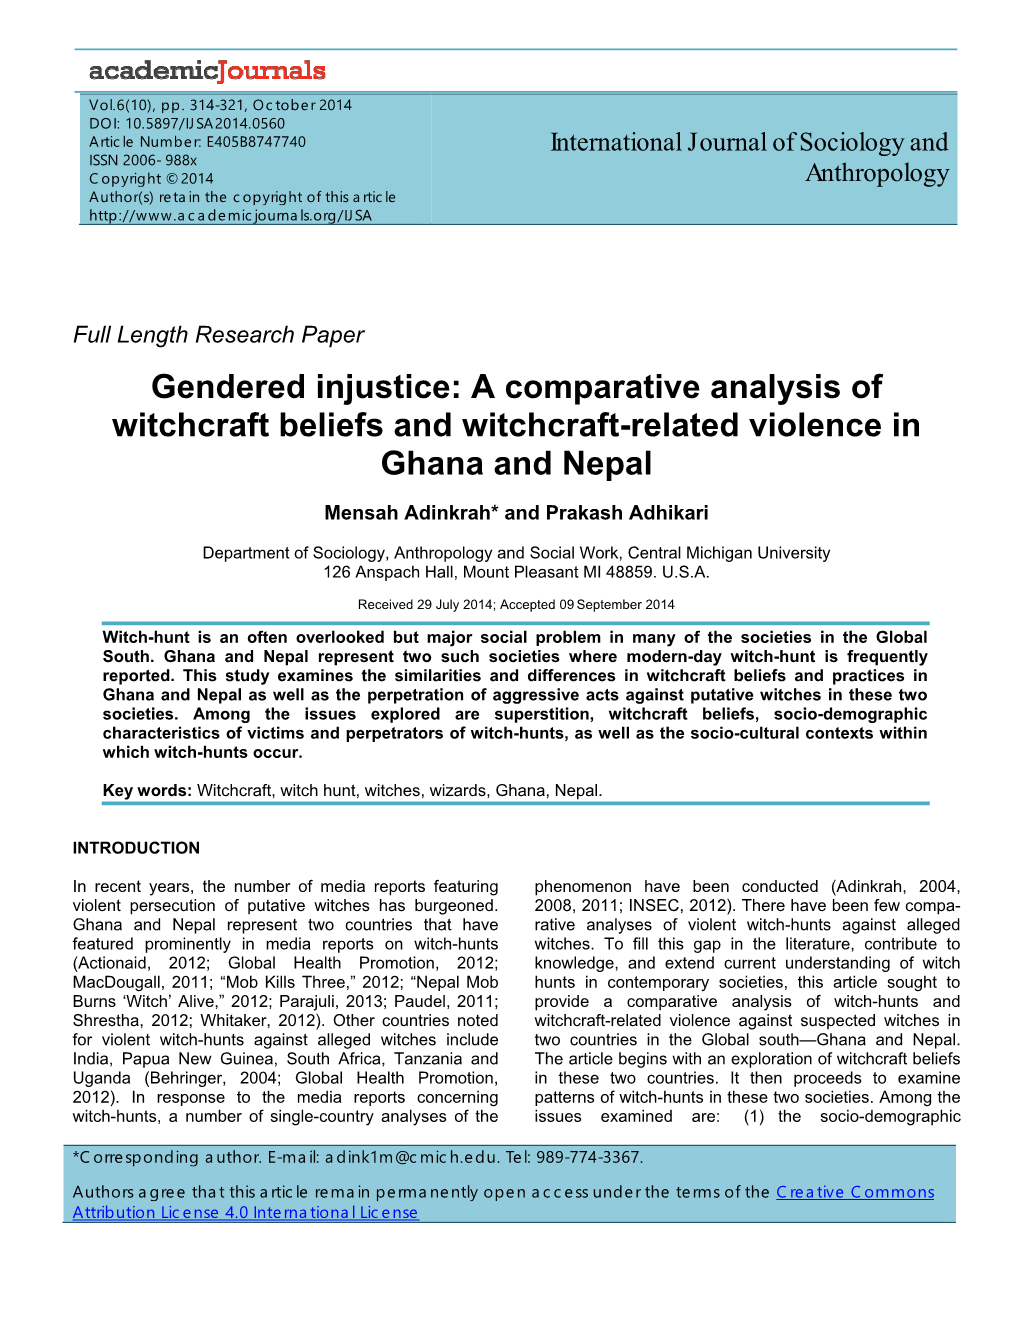 Gendered Injustice: a Comparative Analysis of Witchcraft Beliefs and Witchcraft-Related Violence in Ghana and Nepal